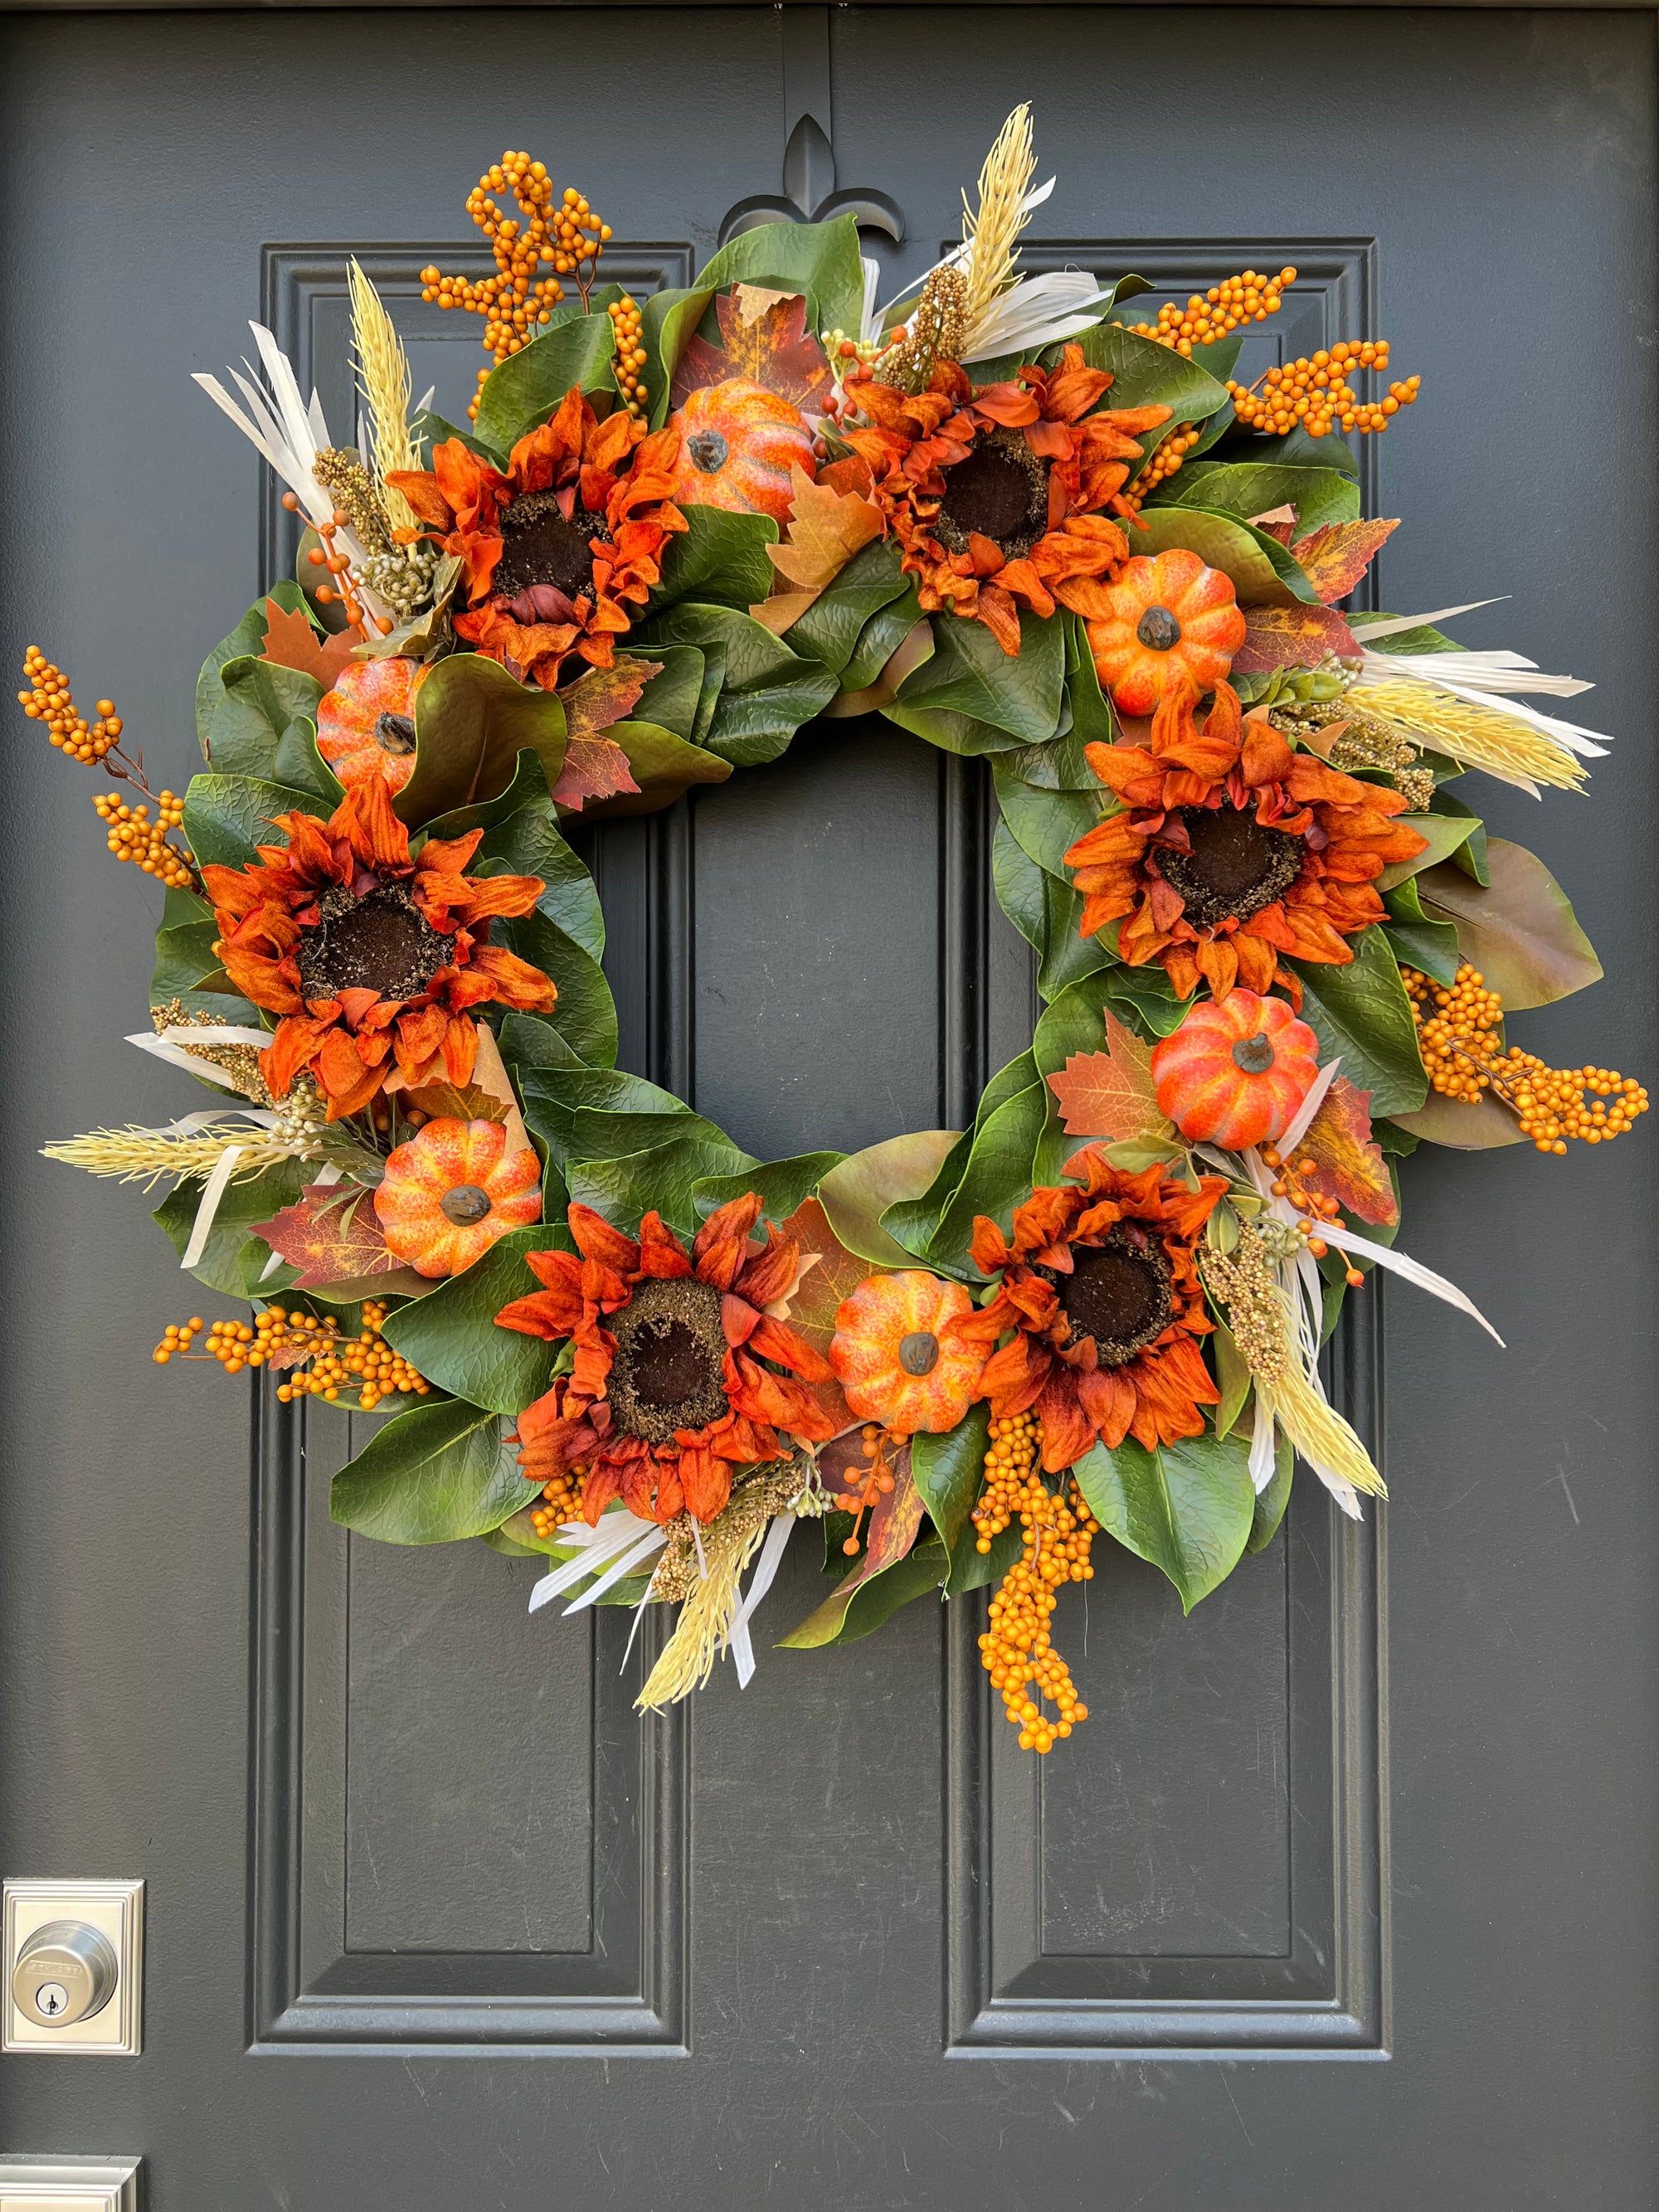 24 Inch Fall Magnolia Wreath with Sunflowers and Pumpkins, Ready to Ship